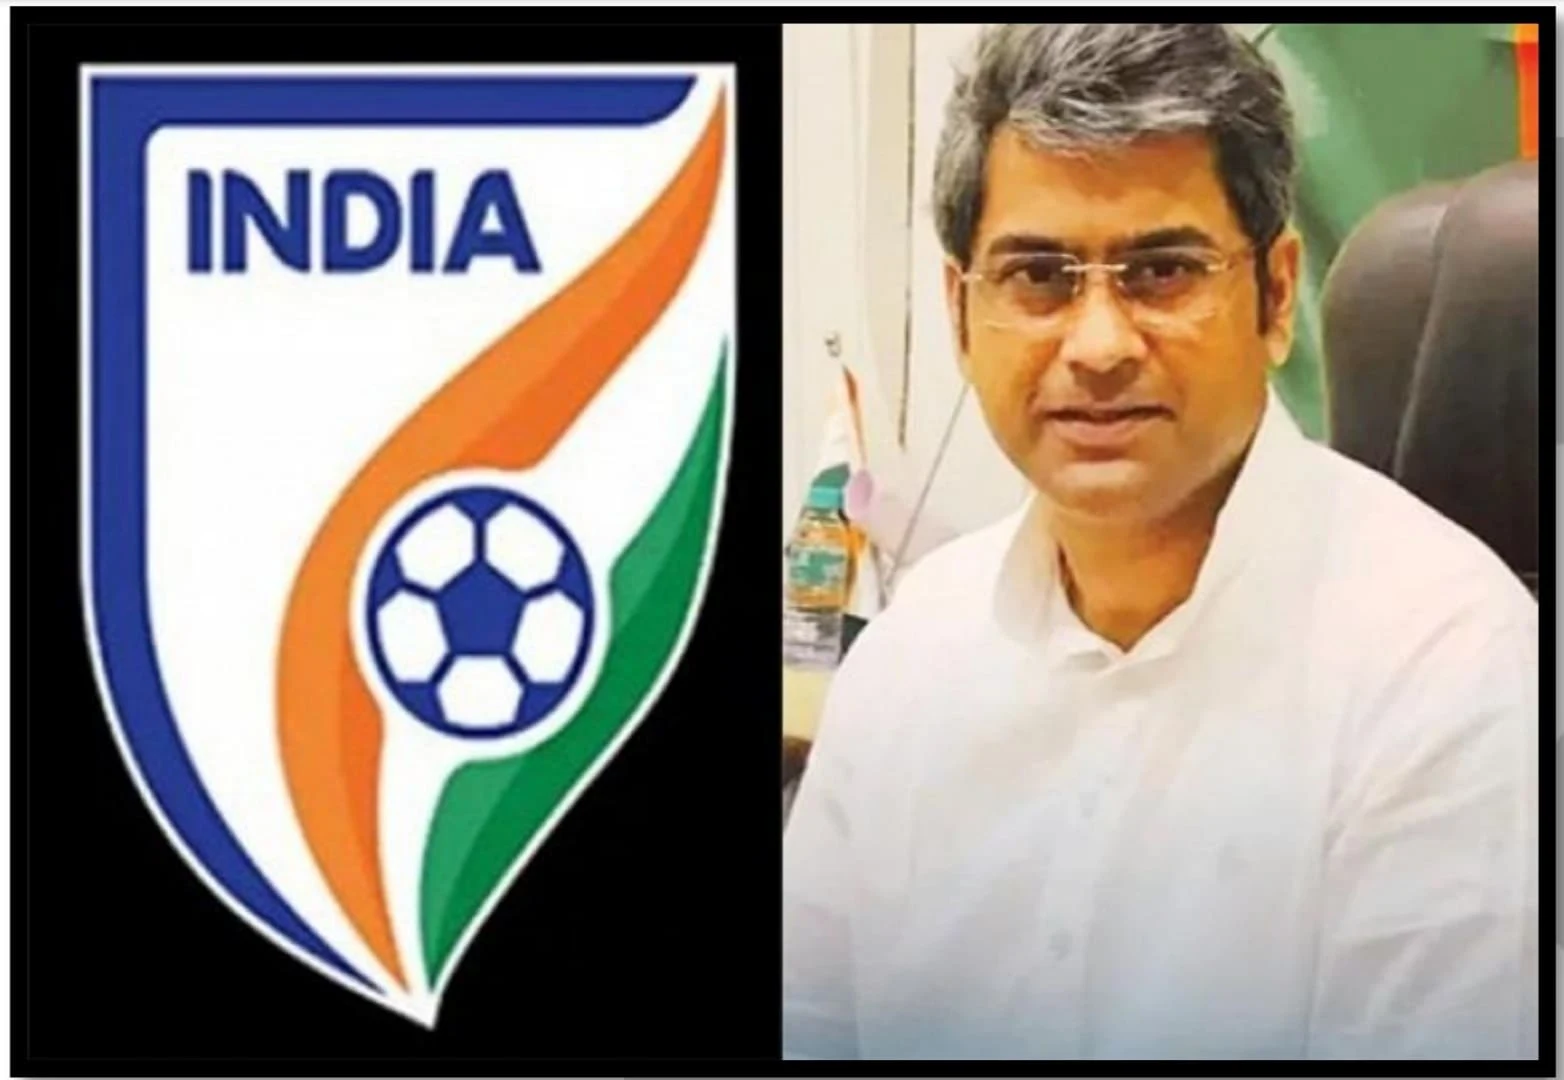 Kalyan Chaubey becomes the new President of All India Football Federation     On September 02, 2022 Former Mohun Bagan and East Bengal goalkeeper Kalyan Chaubey has been appointed as the new President of All India Football Federation (AIFF).   He is the first former national team player to be elected as the head of the governing body of Indian football. In this election, 34 representative members of the State-Union participated. Significantly, he defeated former Indian captain Bhaichung Bhutia by 33-1 votes.  All India Football Federation (AIFF)   The All India Football Federation was established in the year 1937 (after India's independence gained FIFA affiliation in the year 1948). Its headquarters is located in New Delhi.